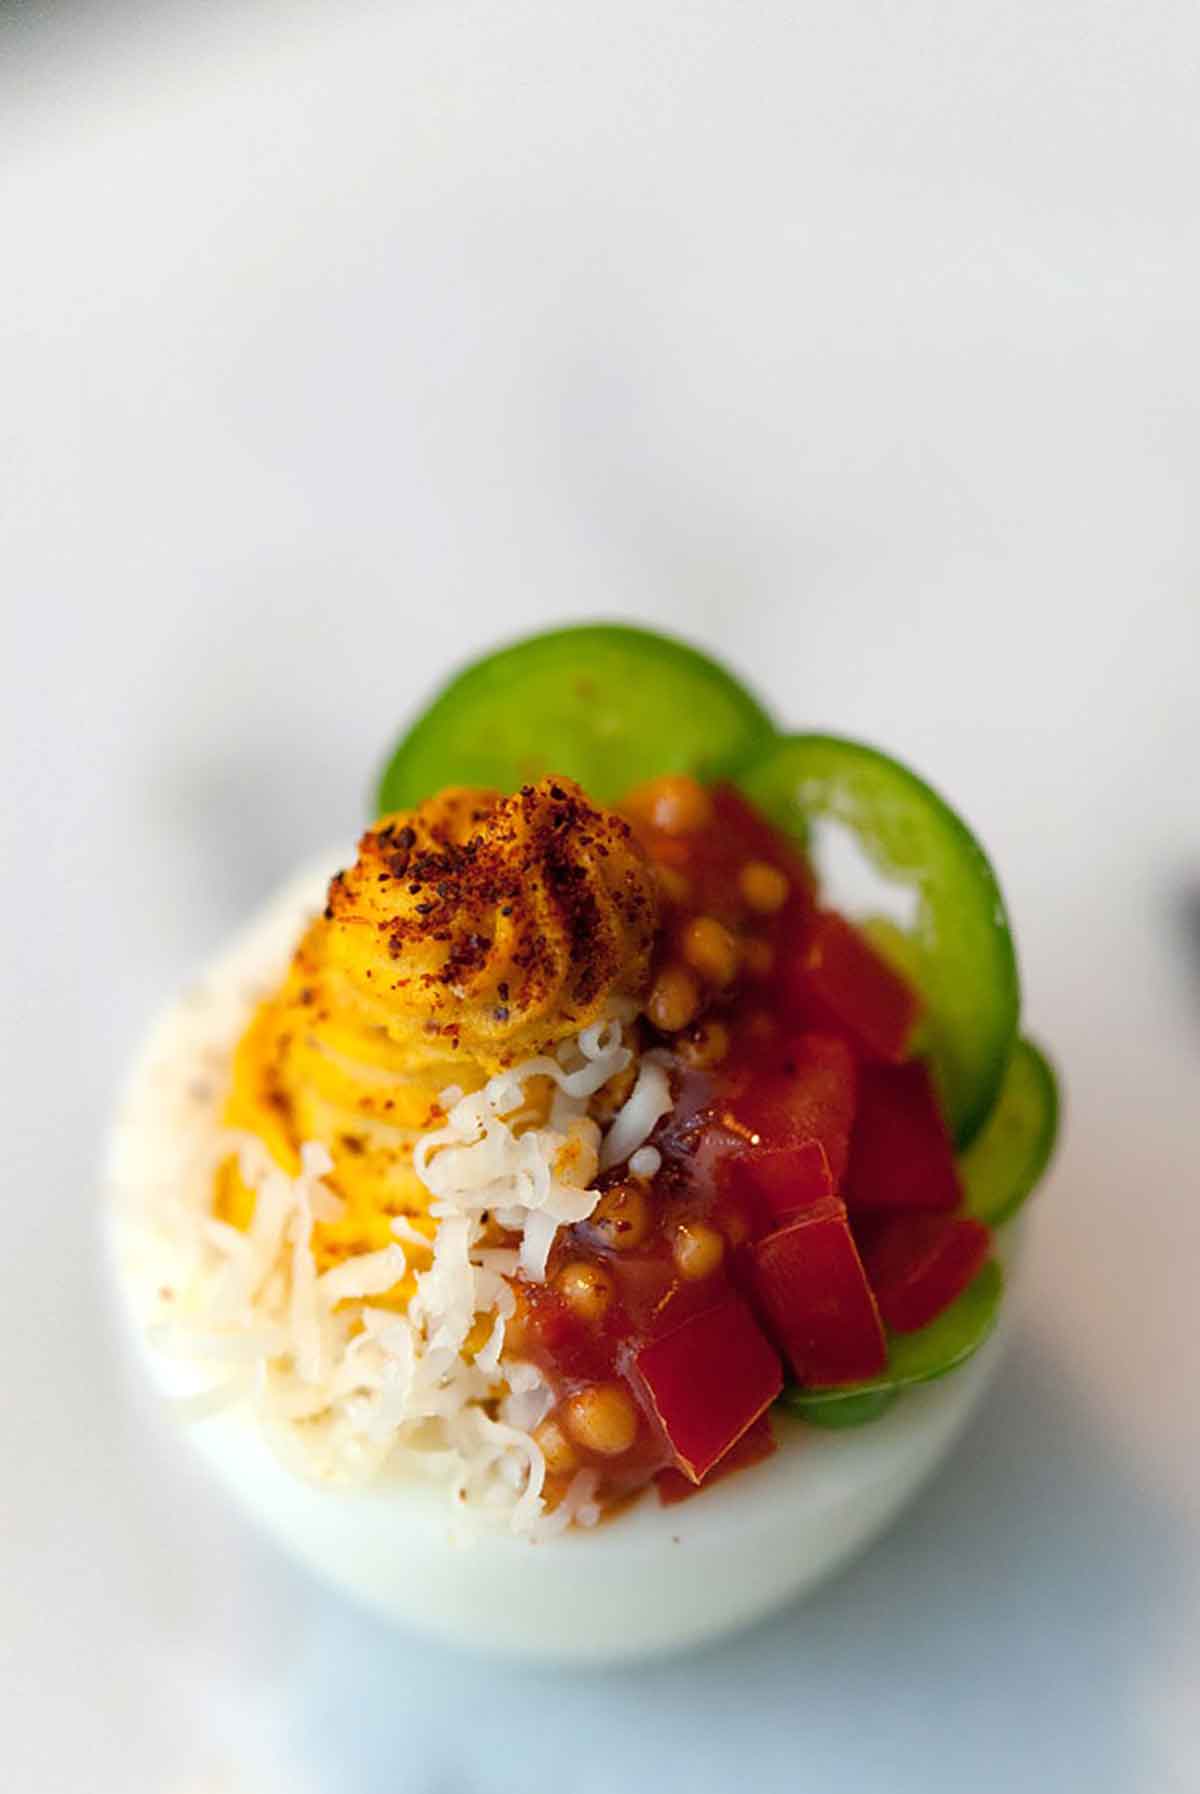 A deviled egg, garnished with sliced jalapeños, diced tomatoes, mustard caviar, shredded cheese and paprika.